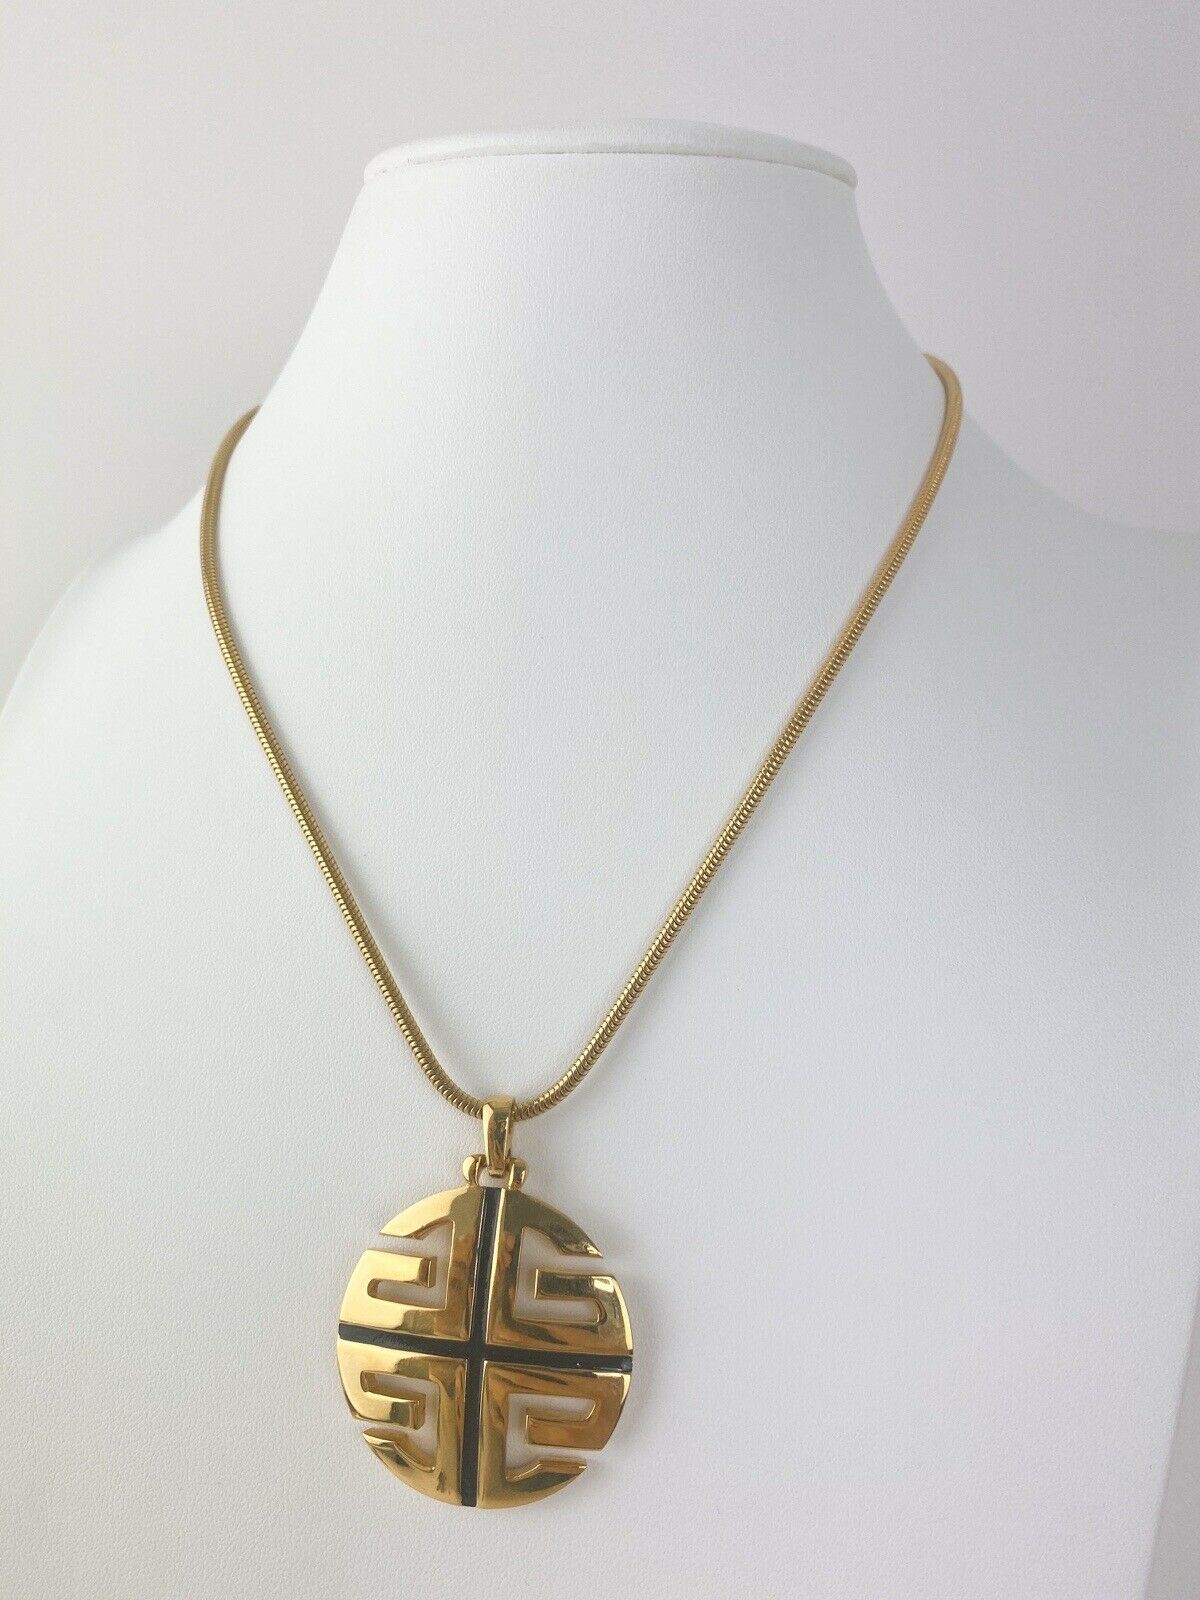 【SOLD OUT】Givenchy Paris New York Vintage Gold Tone Logo Necklace